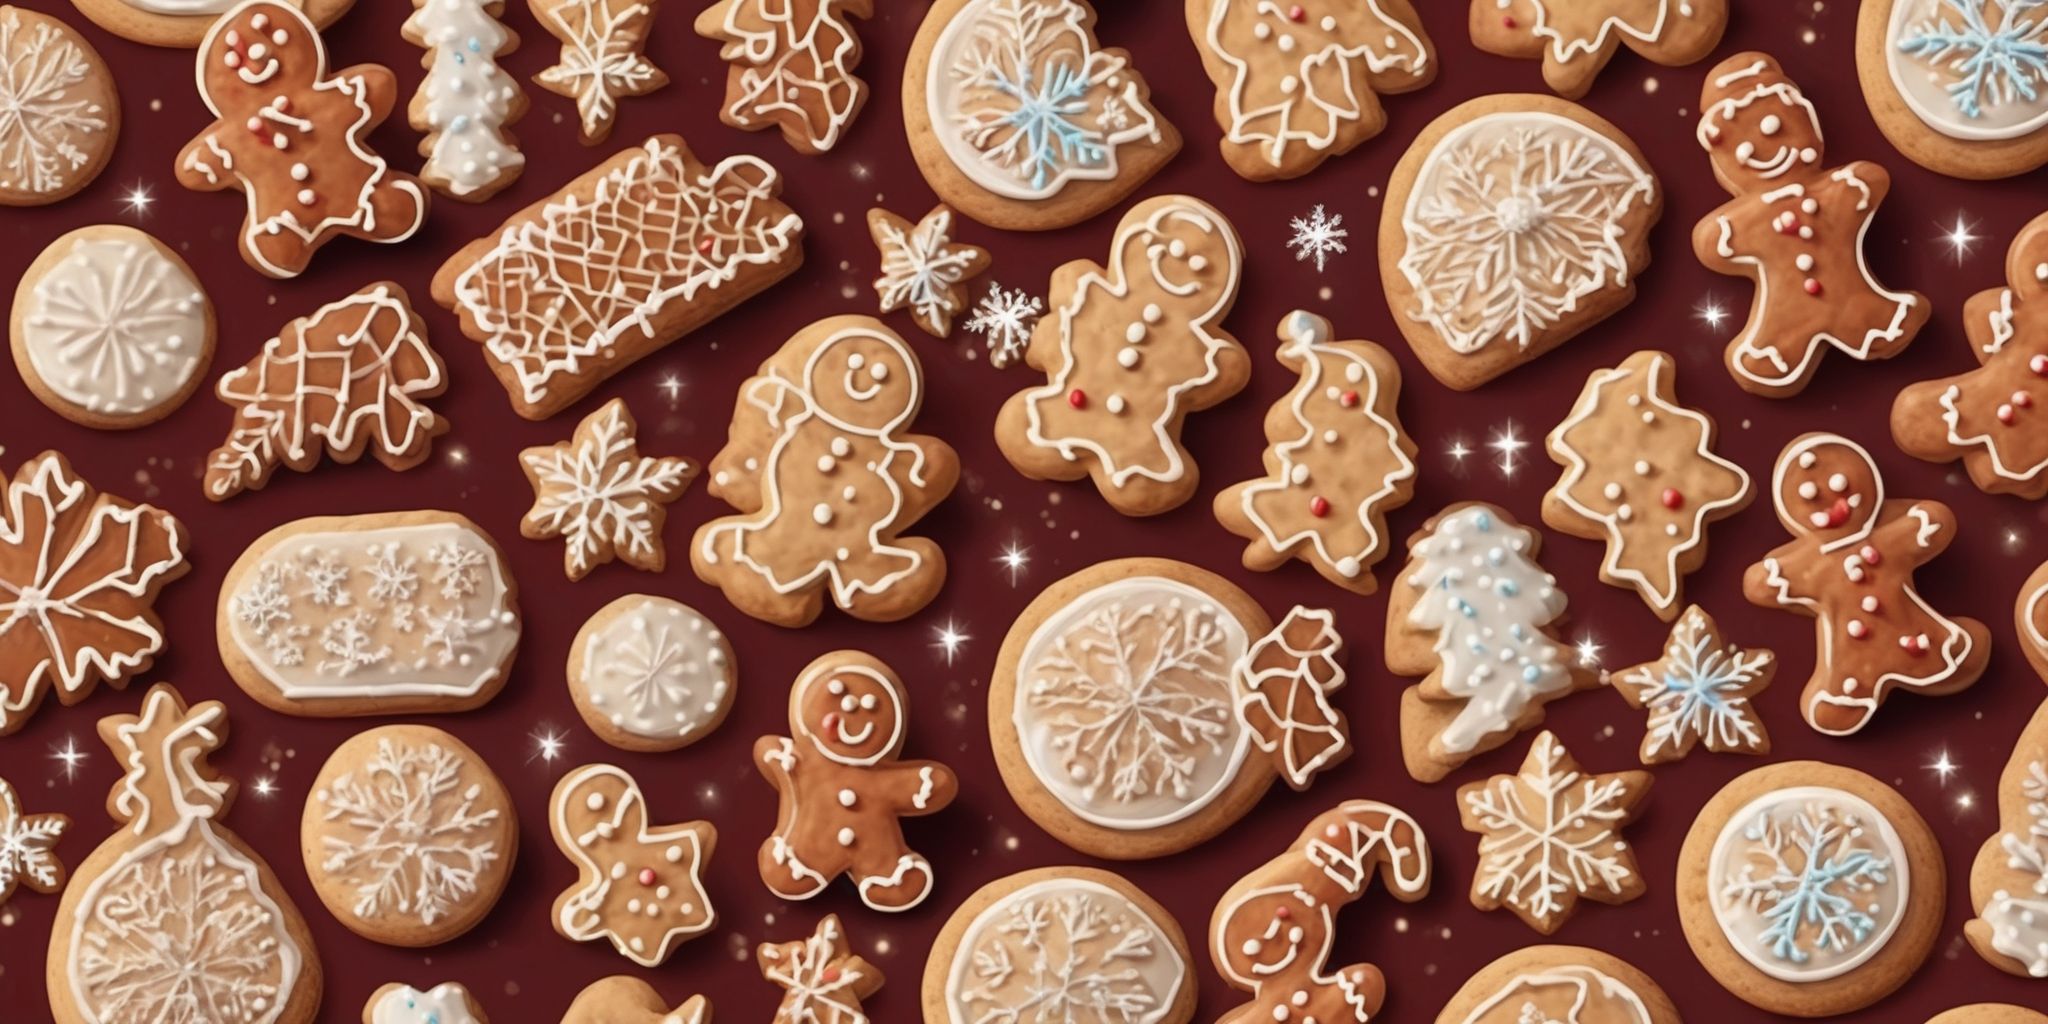 Cookies in realistic Christmas style